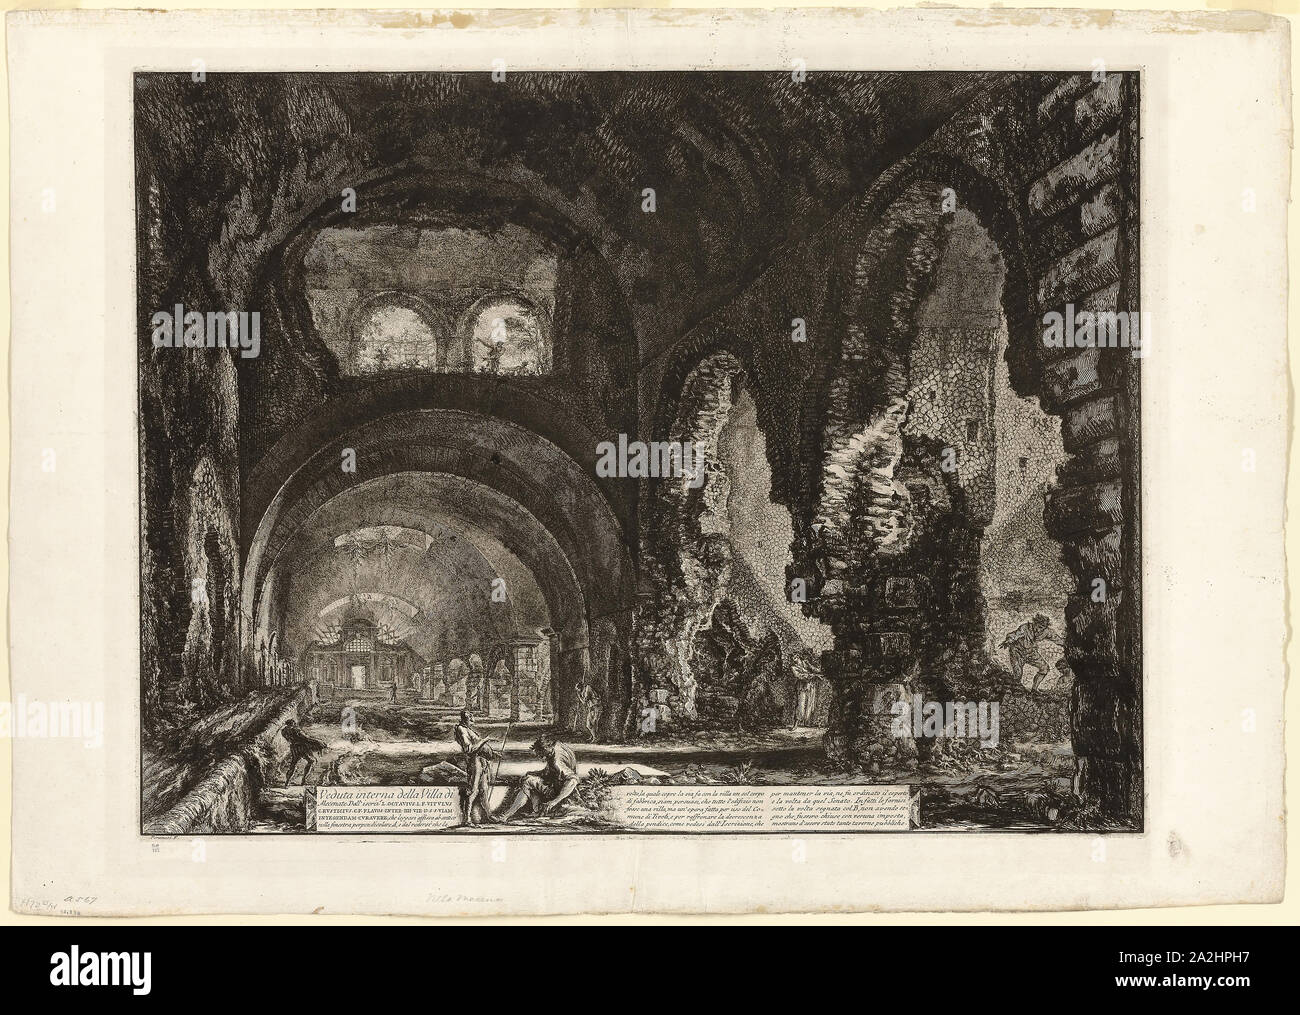 Interior view of the villa of Maecenas, from Views of Rome, 1764, published 1800–07, Giovanni Battista Piranesi (Italian, 1720-1778), published by Francesco (Italian, 1758-1810) and Pietro Piranesi (Italian, born 1758/9), Italy, Etching on heavy ivory laid paper, 469 x 618 mm (image), 476 x 624 mm (plate), 557 x 789 mm (sheet Stock Photo